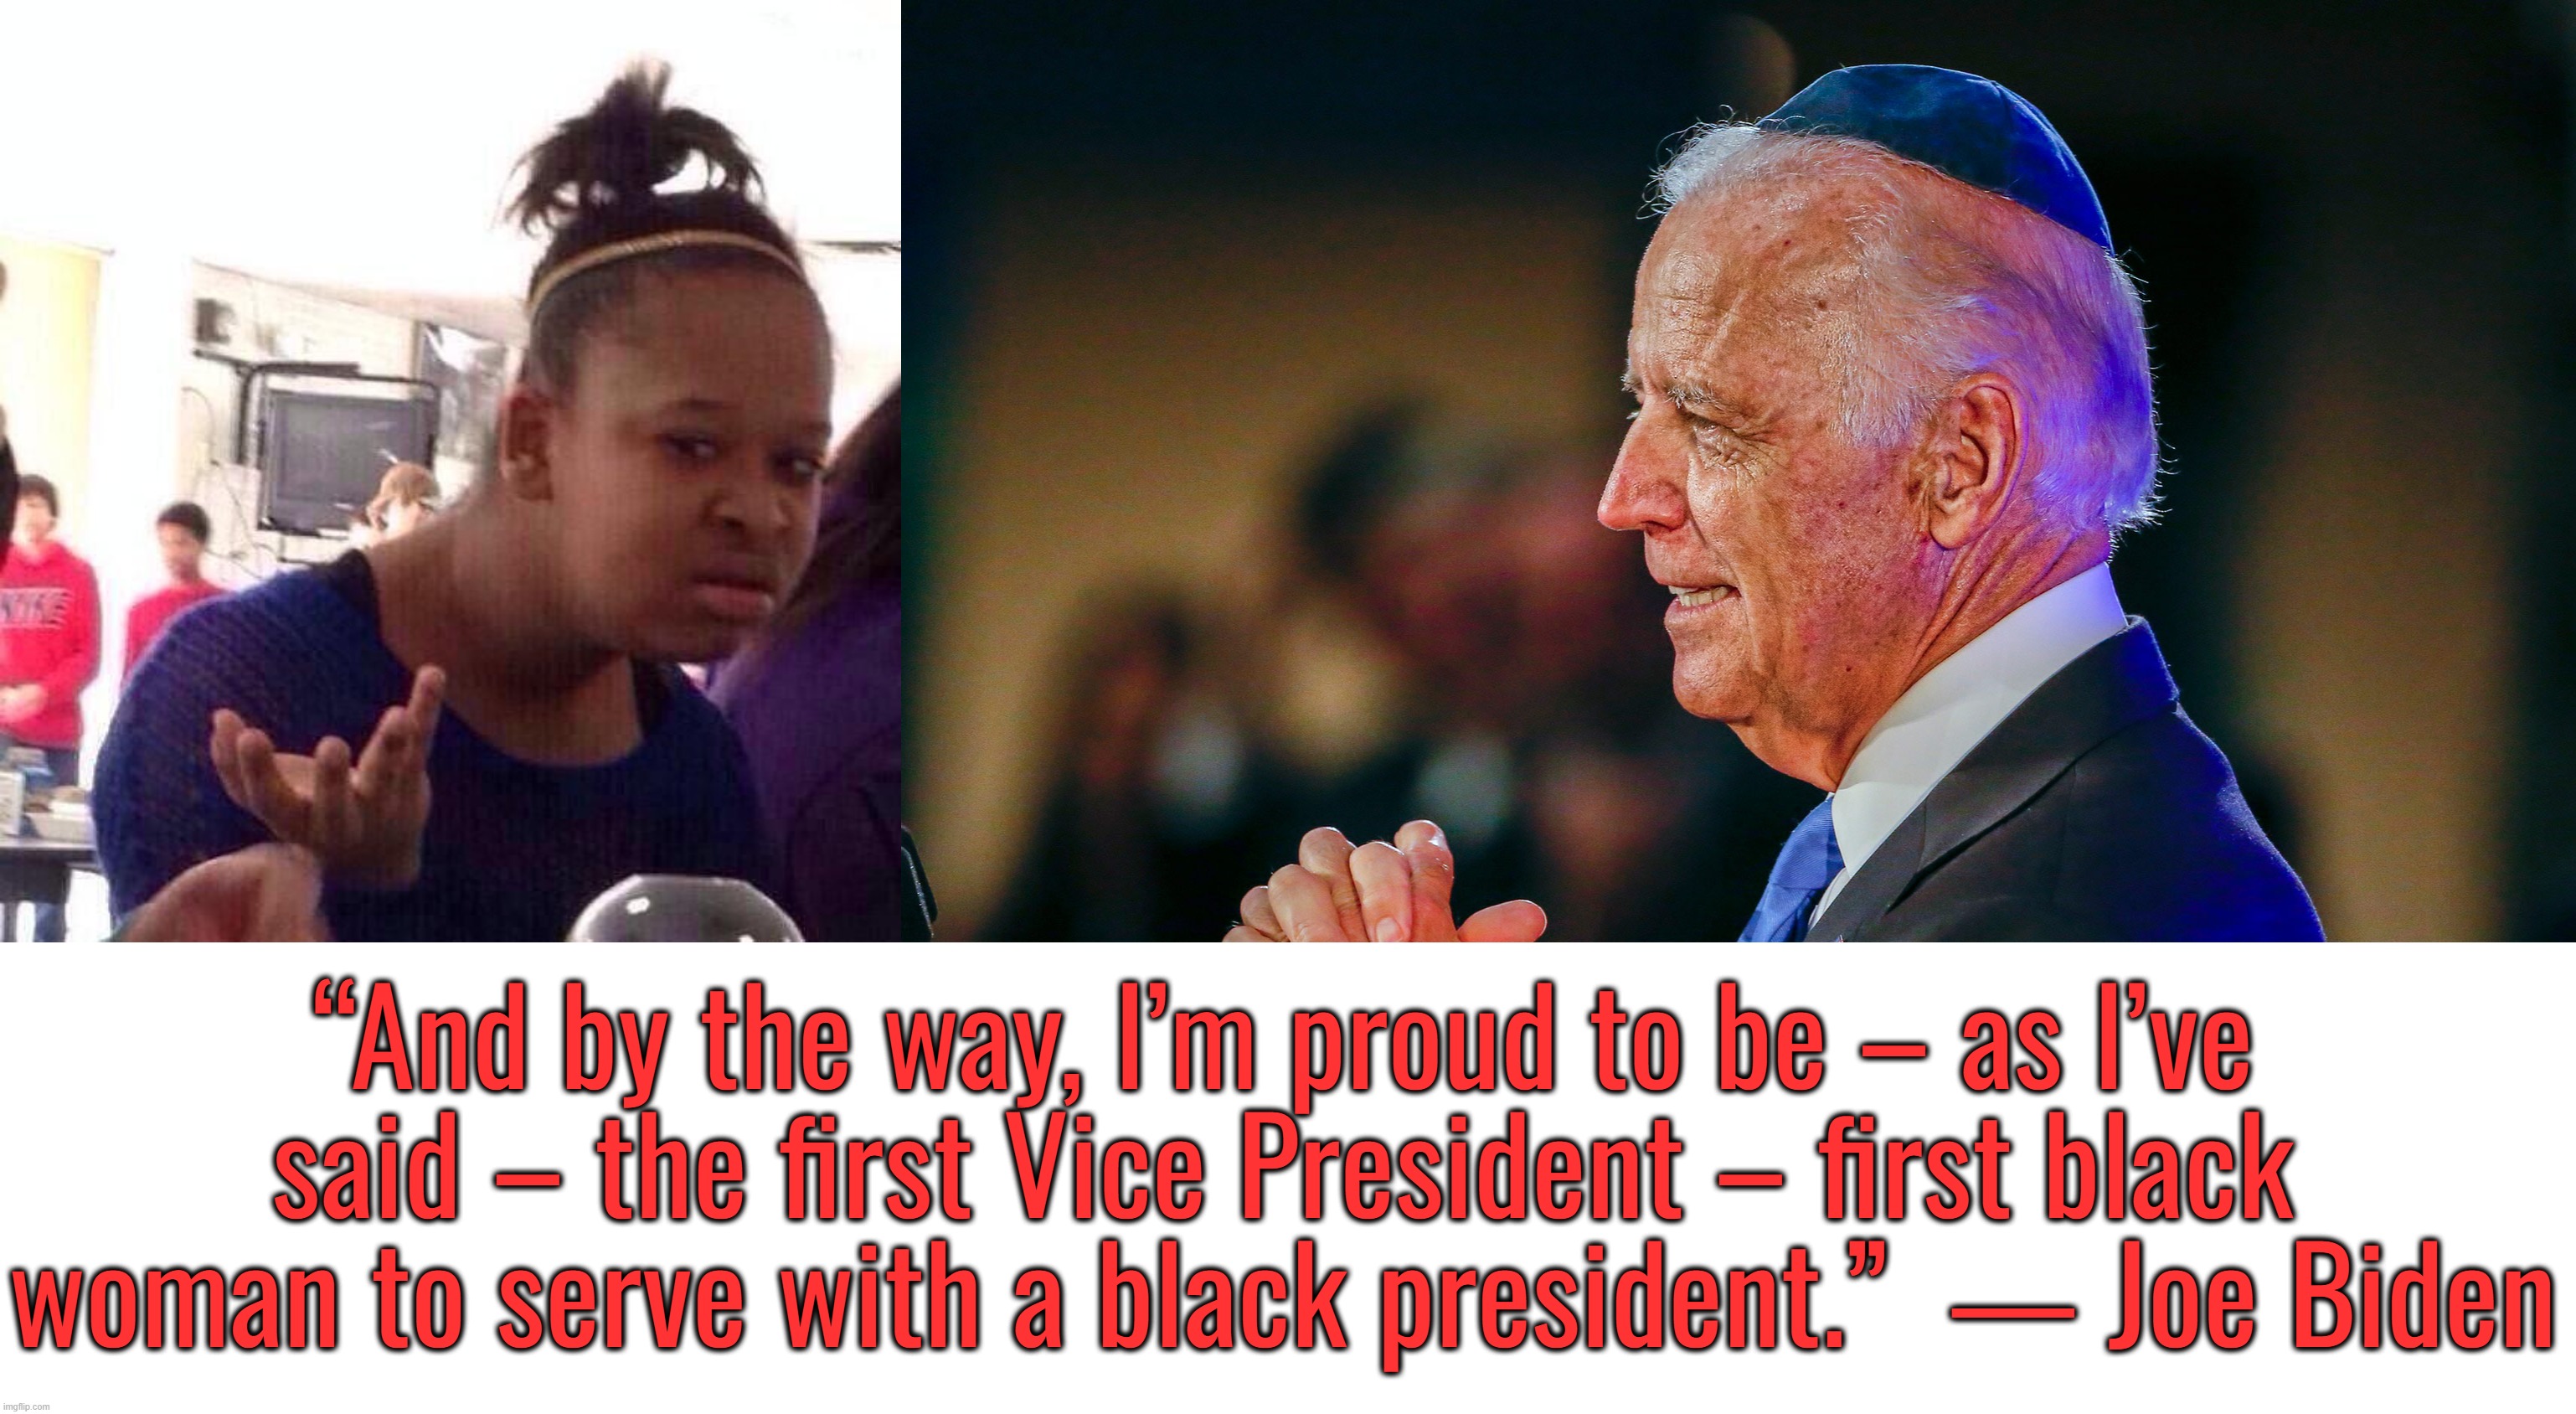 “So, remember, every picture tells a story, don't it…” ― Rod Stewart | “And by the way, I’m proud to be – as I’ve said – the first Vice President – first black woman to serve with a black president.”  ― Joe Biden | image tagged in memes,black girl wat,joe biden,donald trump,ukraine | made w/ Imgflip meme maker